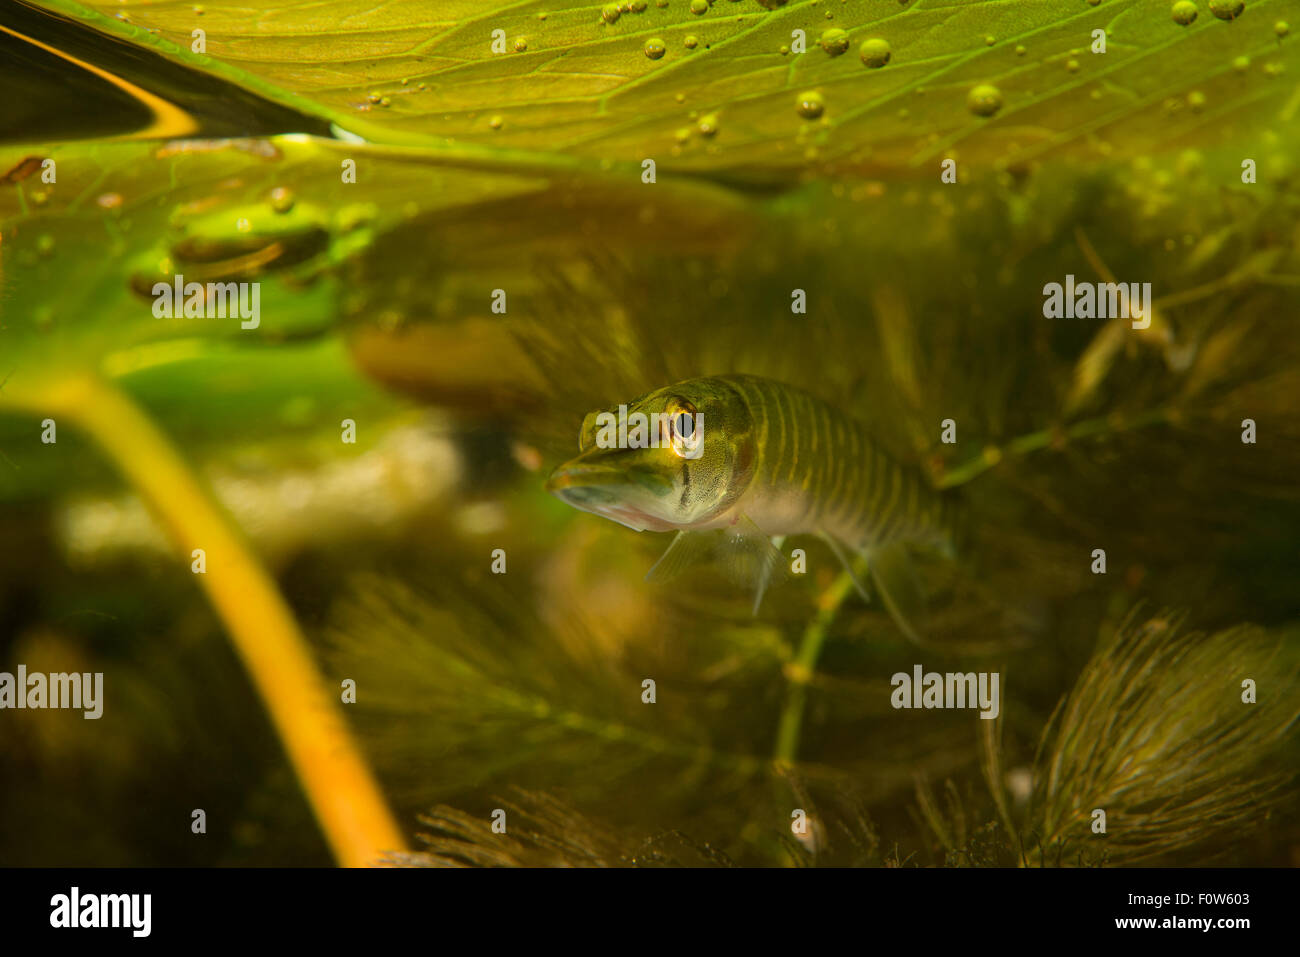 Northern pike (Esox lucius) hiding in the shadow of water lily leaves, Danube Delta, Romania, June. Stock Photo